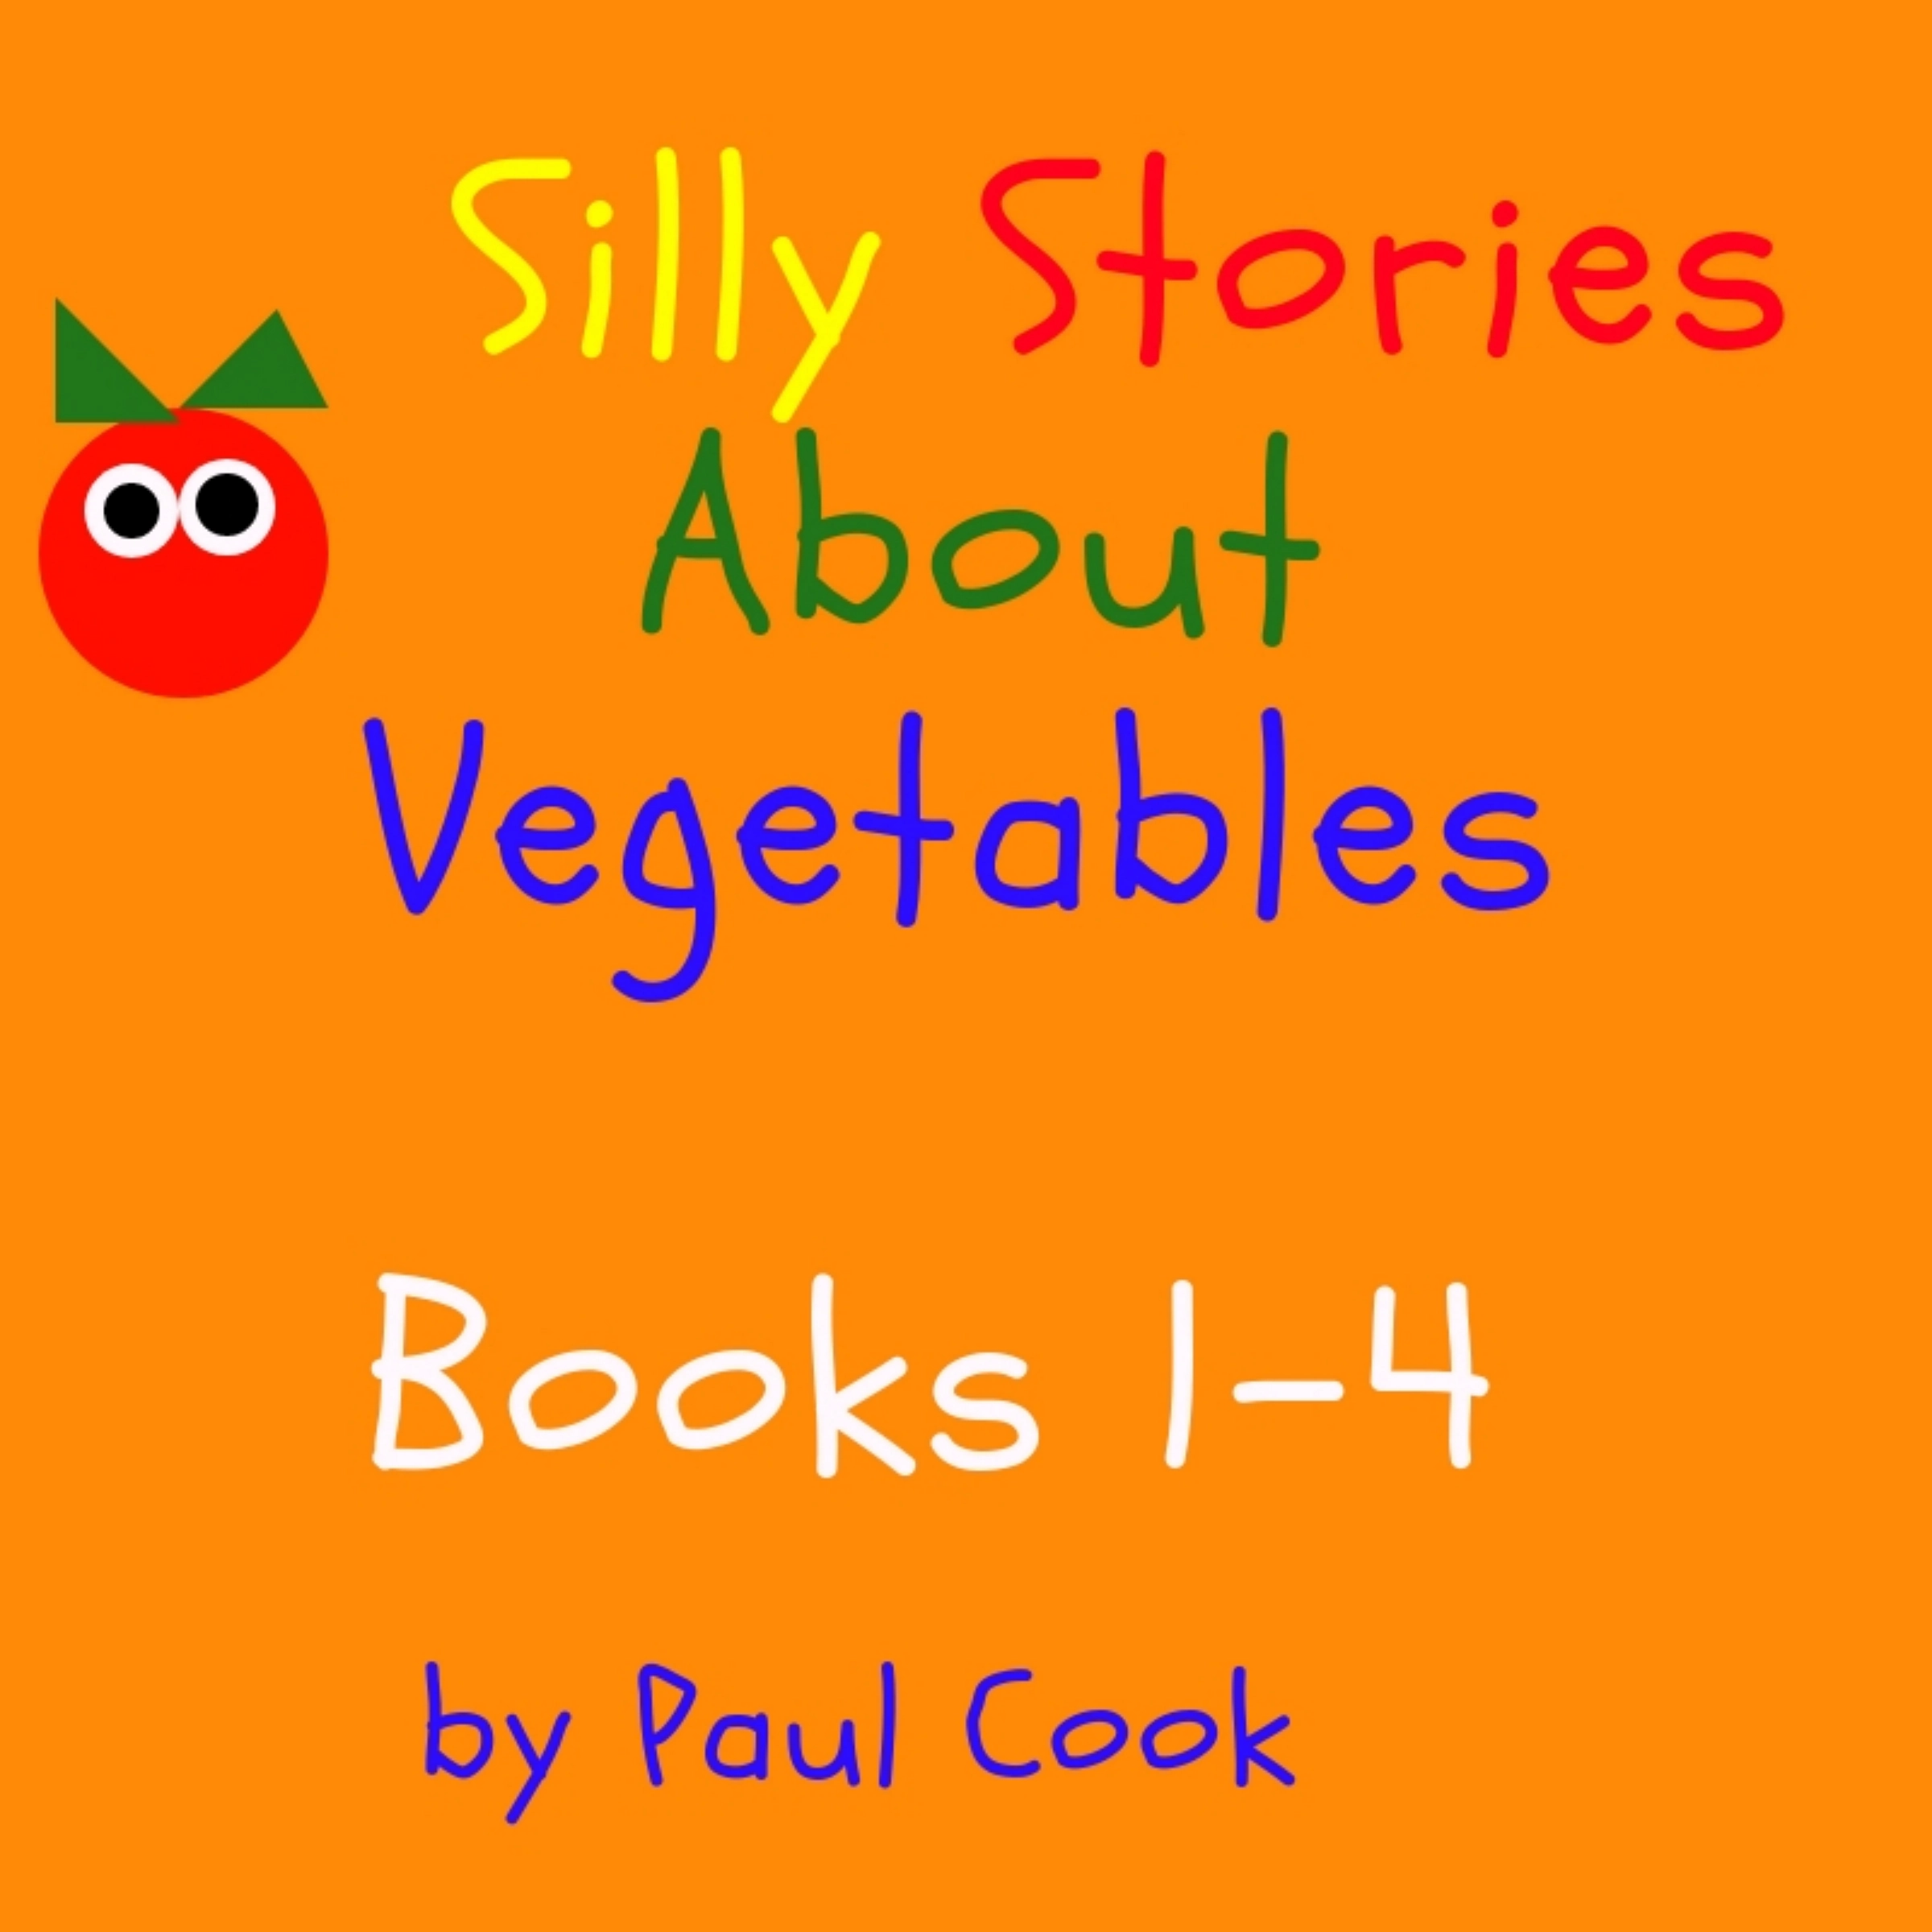 Silly Stories About Vegetables Books 1-4 Audiobook by Paul Cook